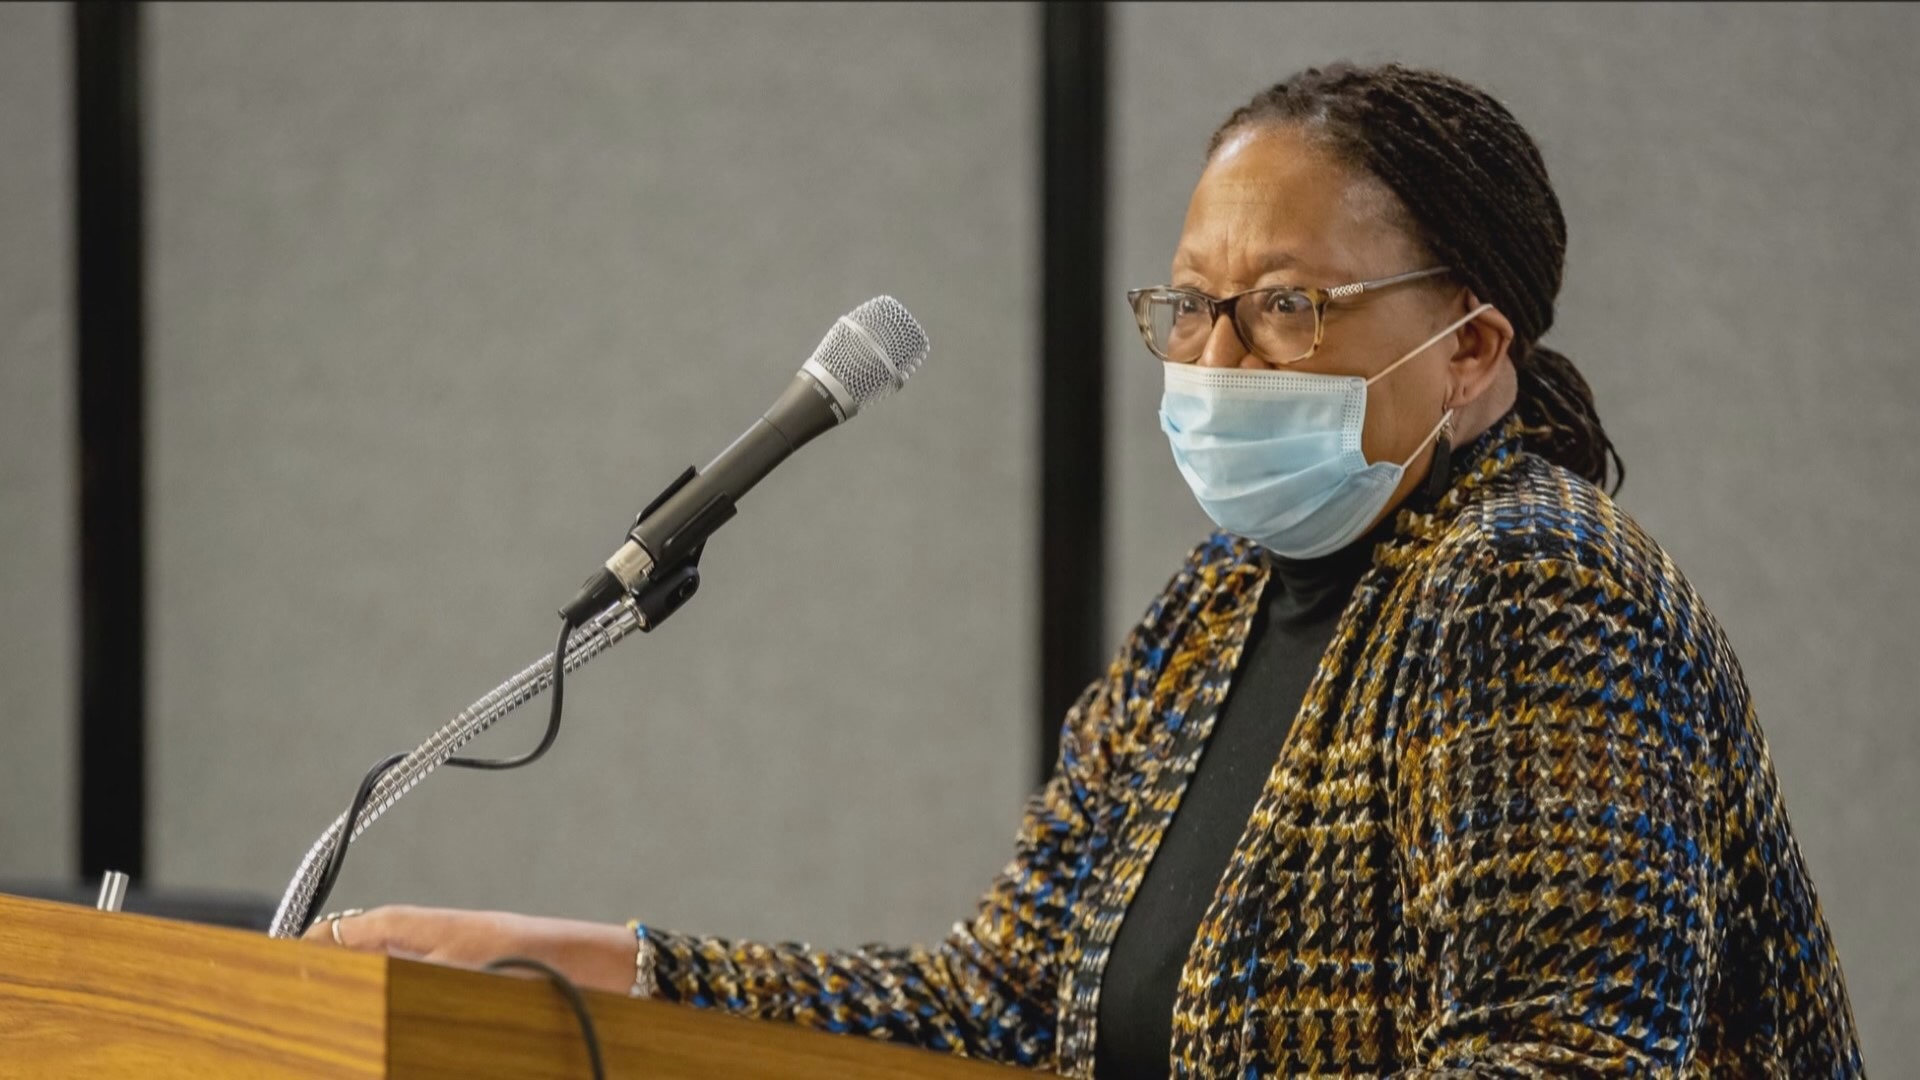 Bailey served 8 years on the Denver School Board in the 1990s. In 2016, she wrote what's known as the Bailey Report detailing the impacts of inequity in schools.